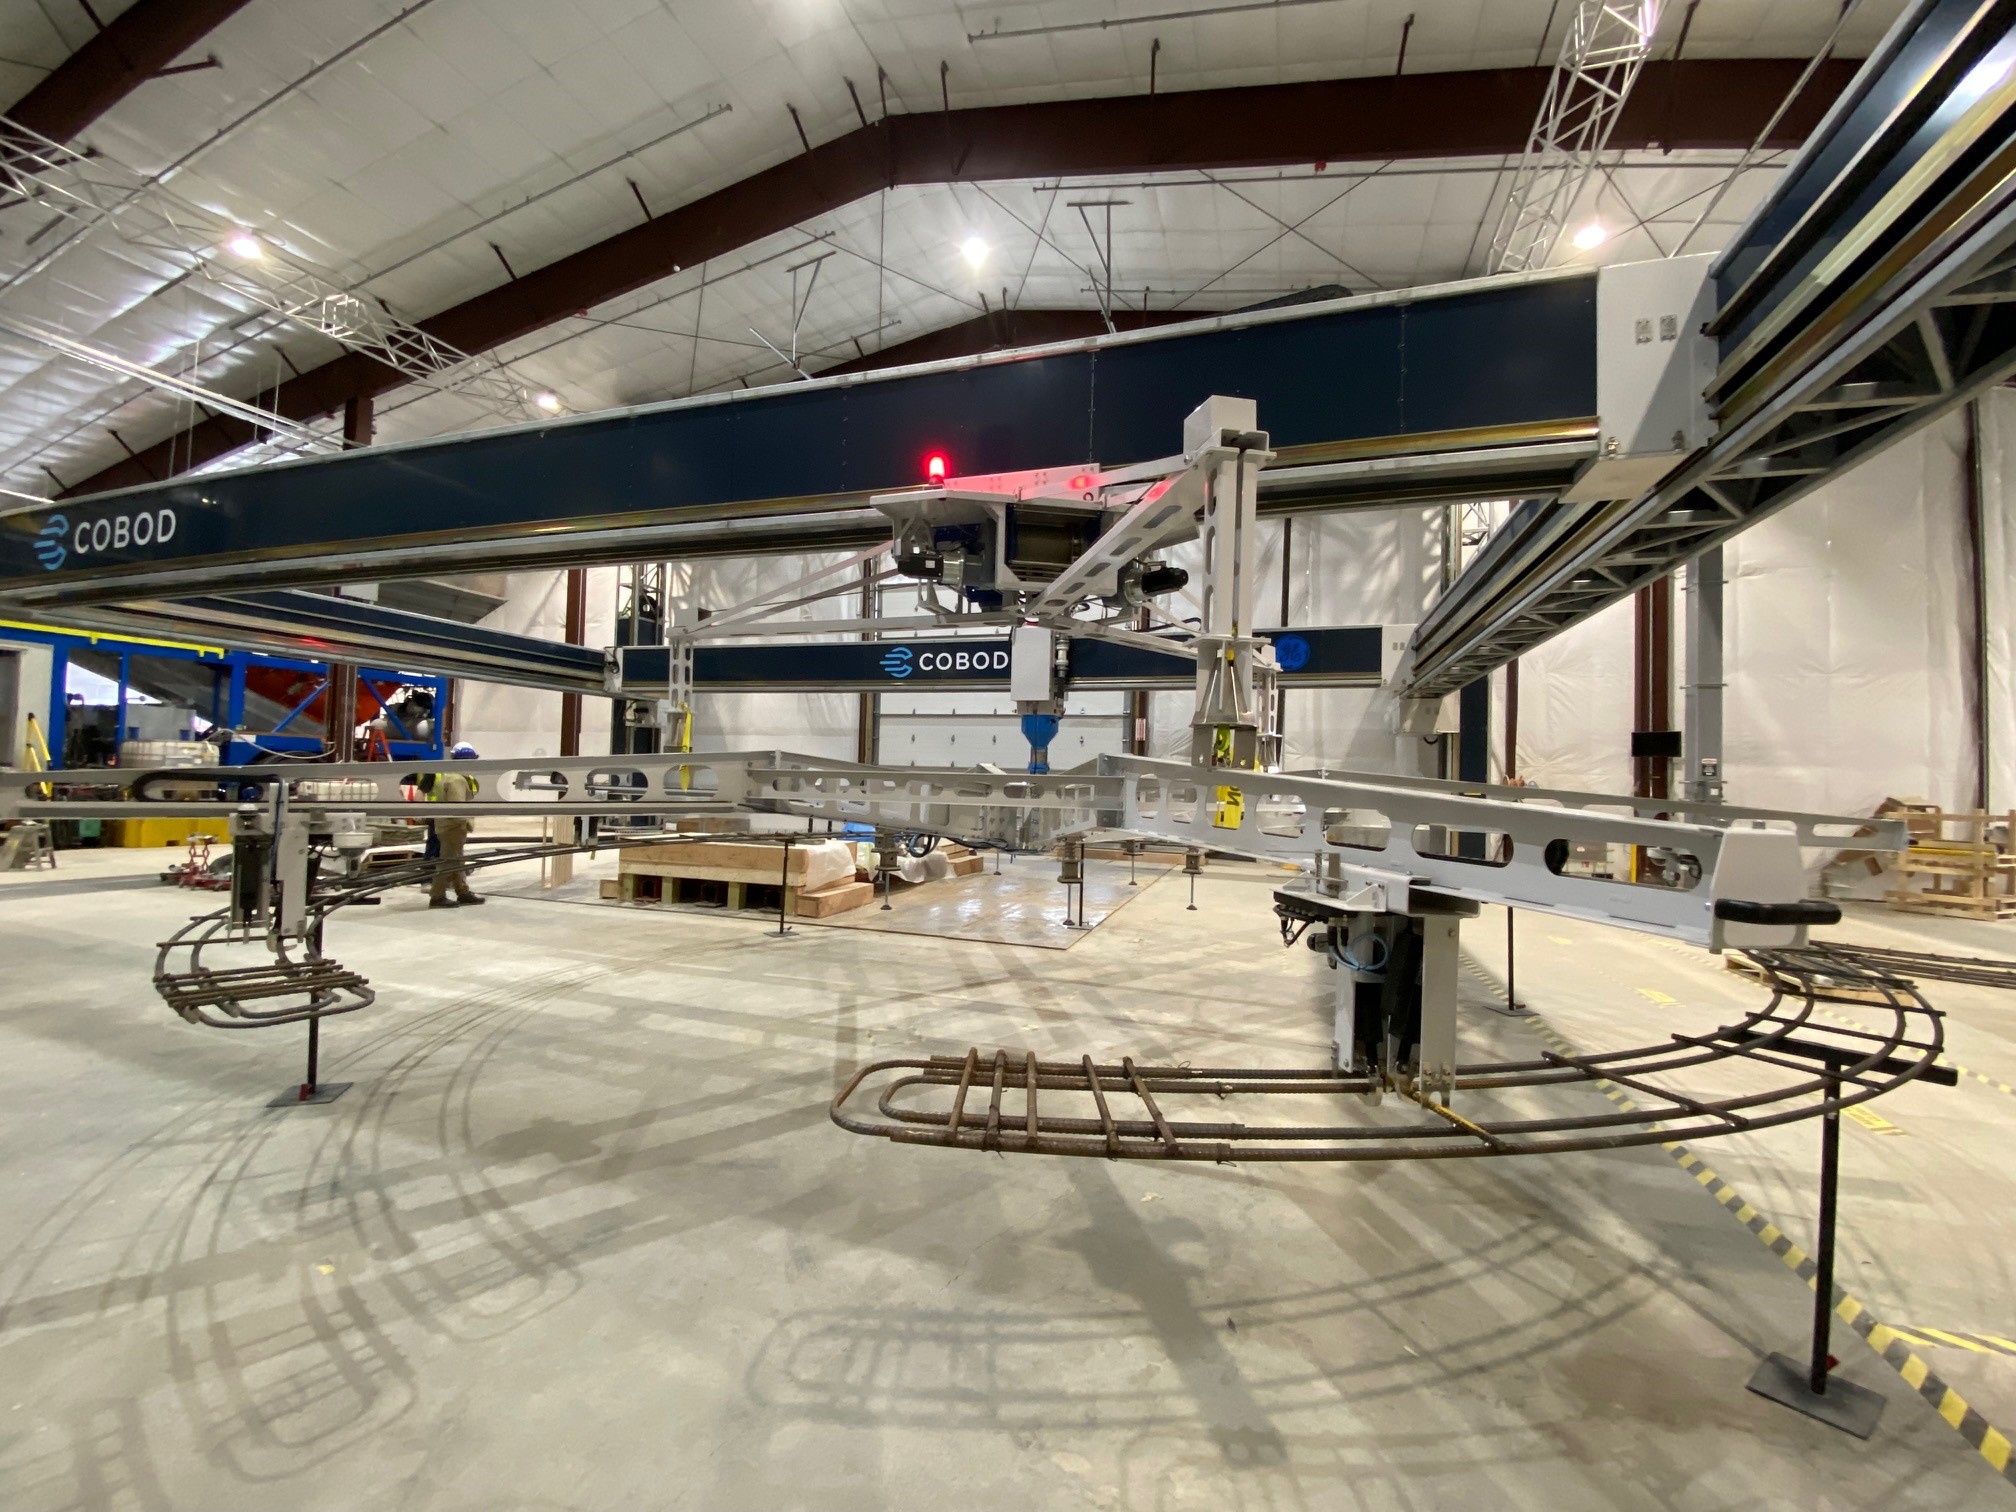 GE's new state-of-the-art concrete 3D printing system from COBOD. Photo via GE Renewable Energy.